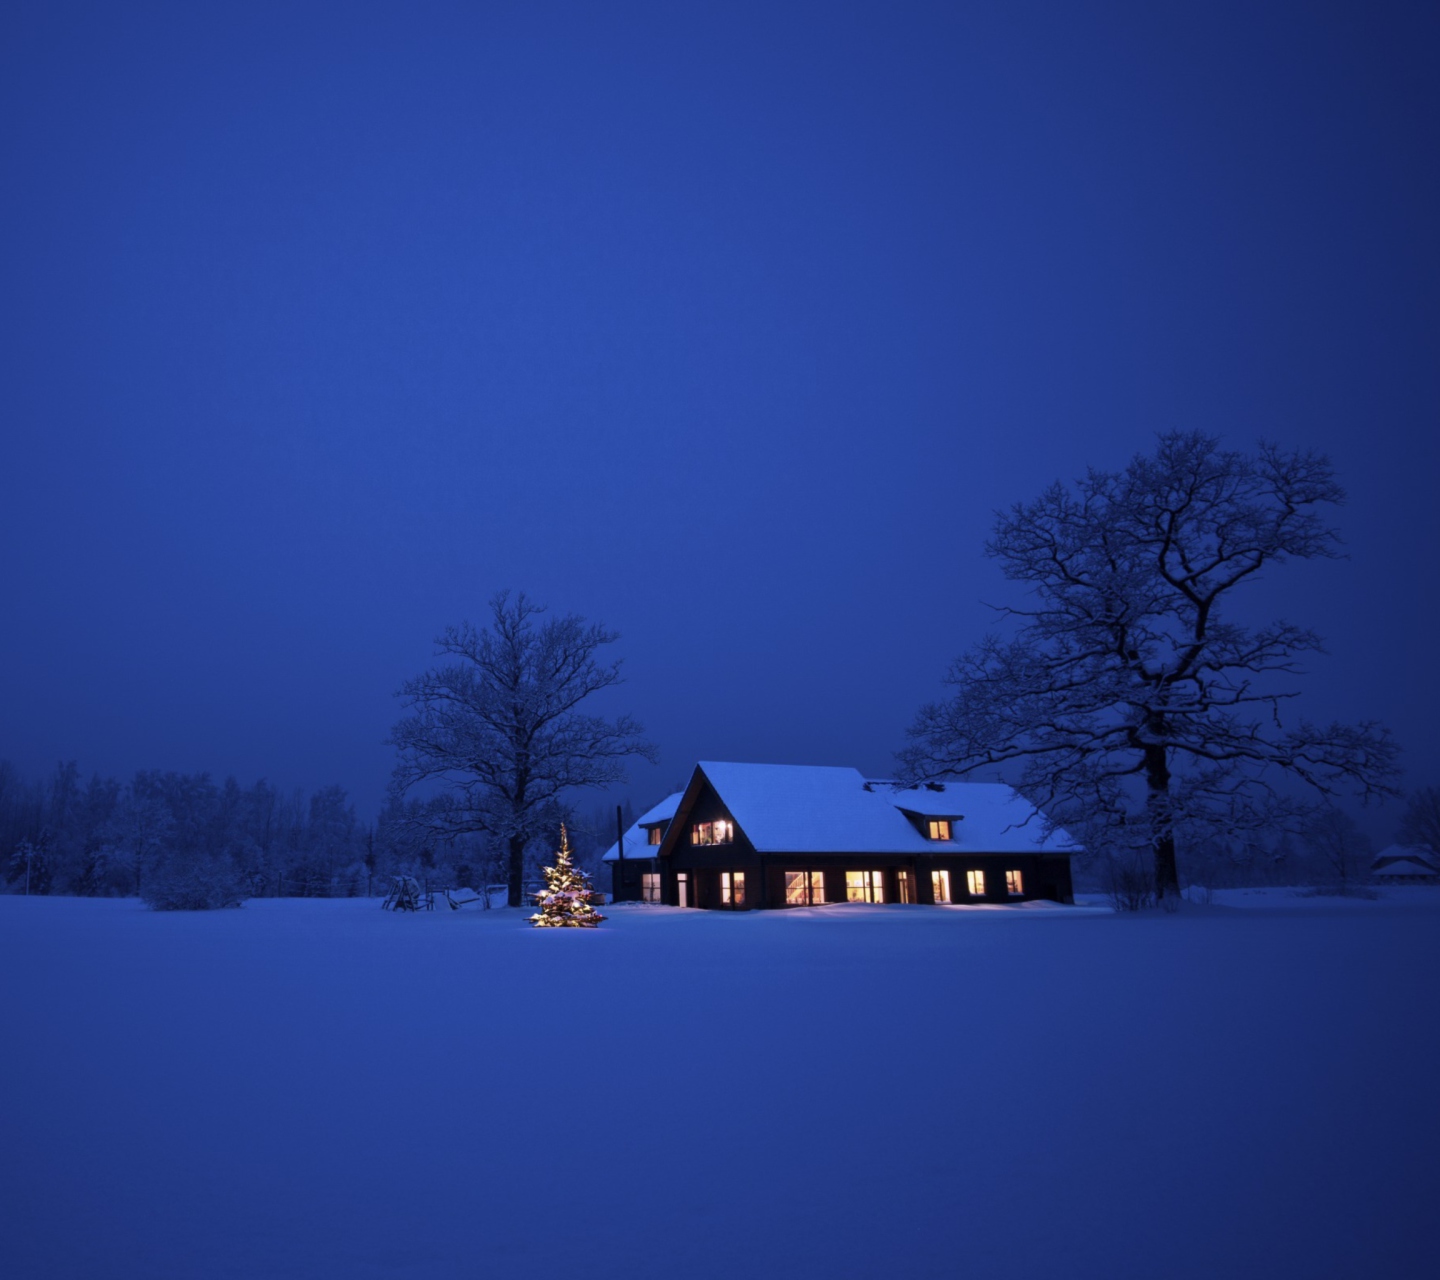 Lonely House, Winter Landscape And Christmas Tree screenshot #1 1440x1280